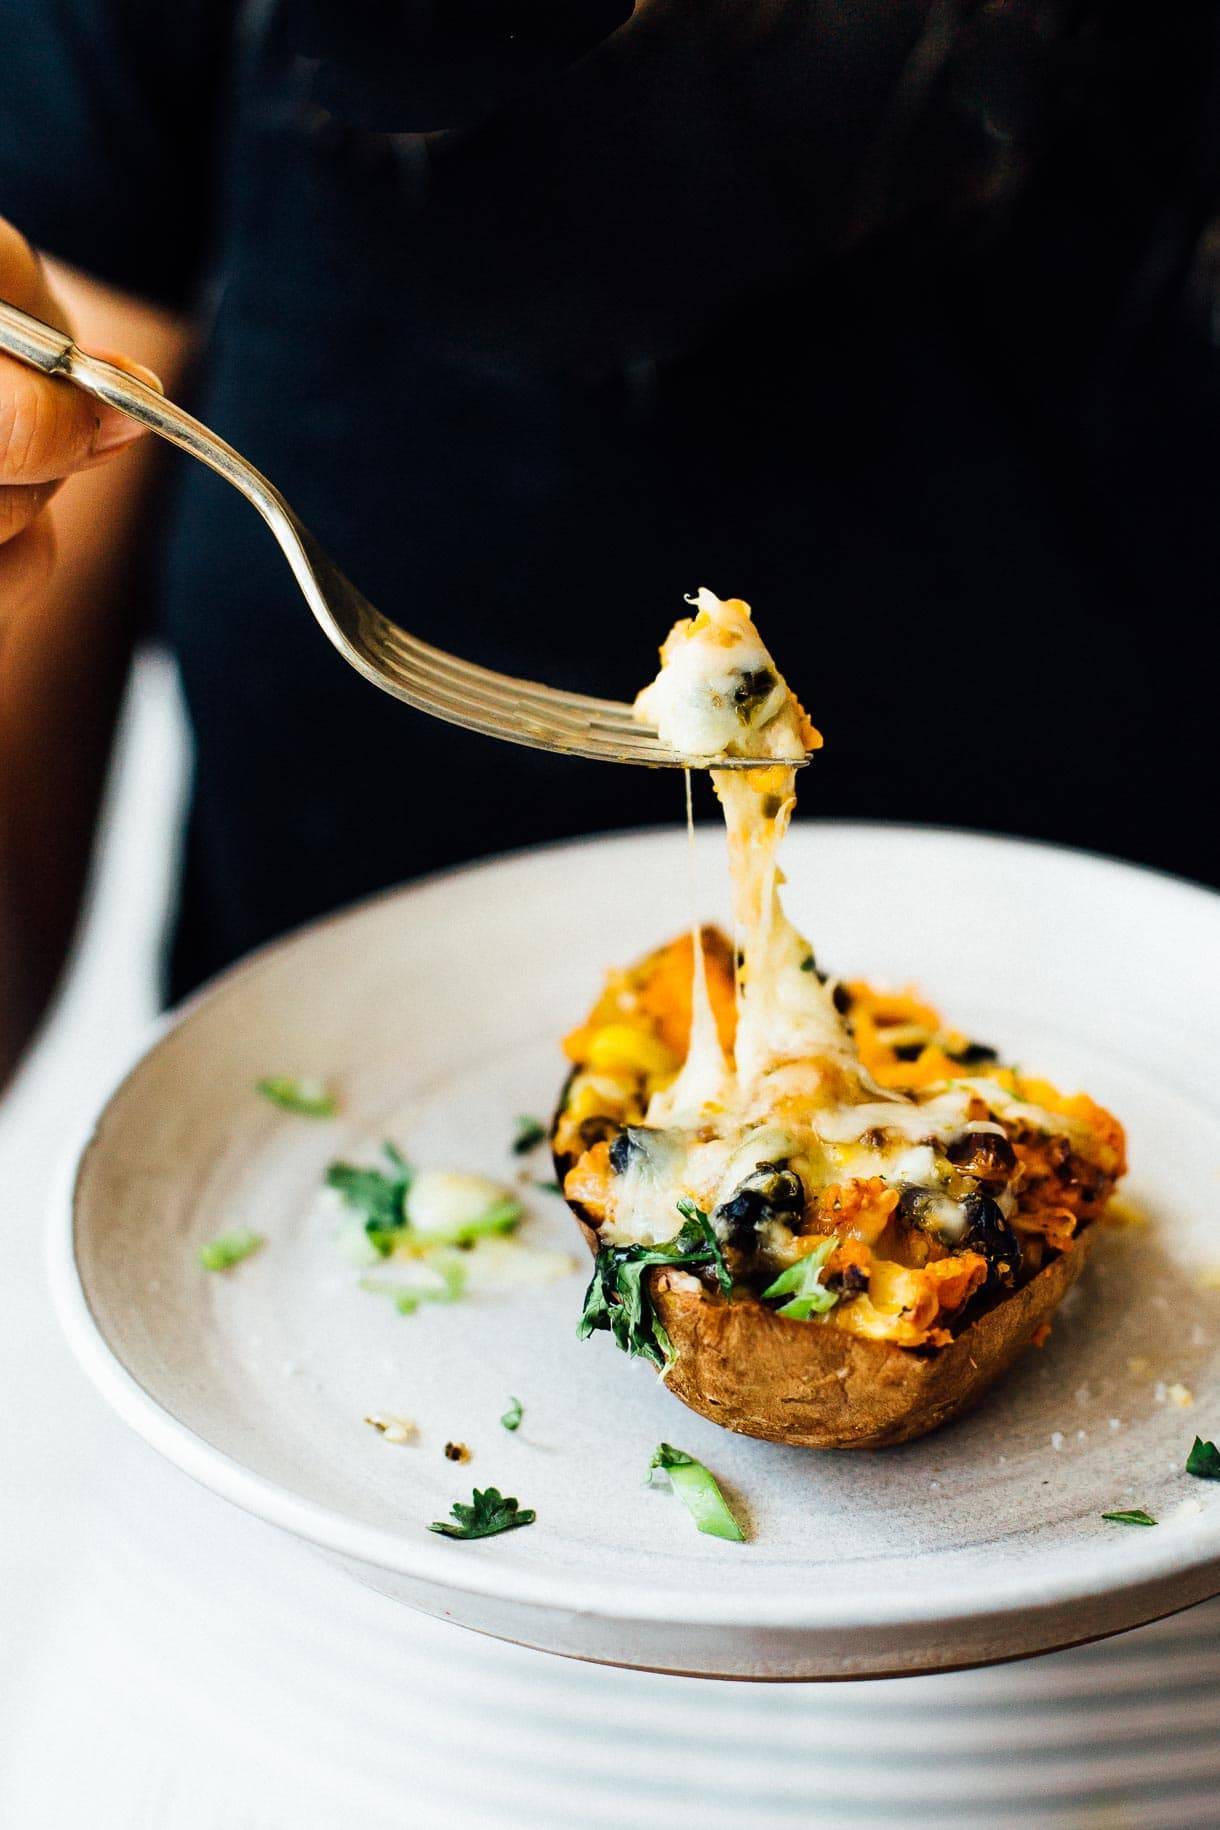 Taking a bite from sweet potato skins.